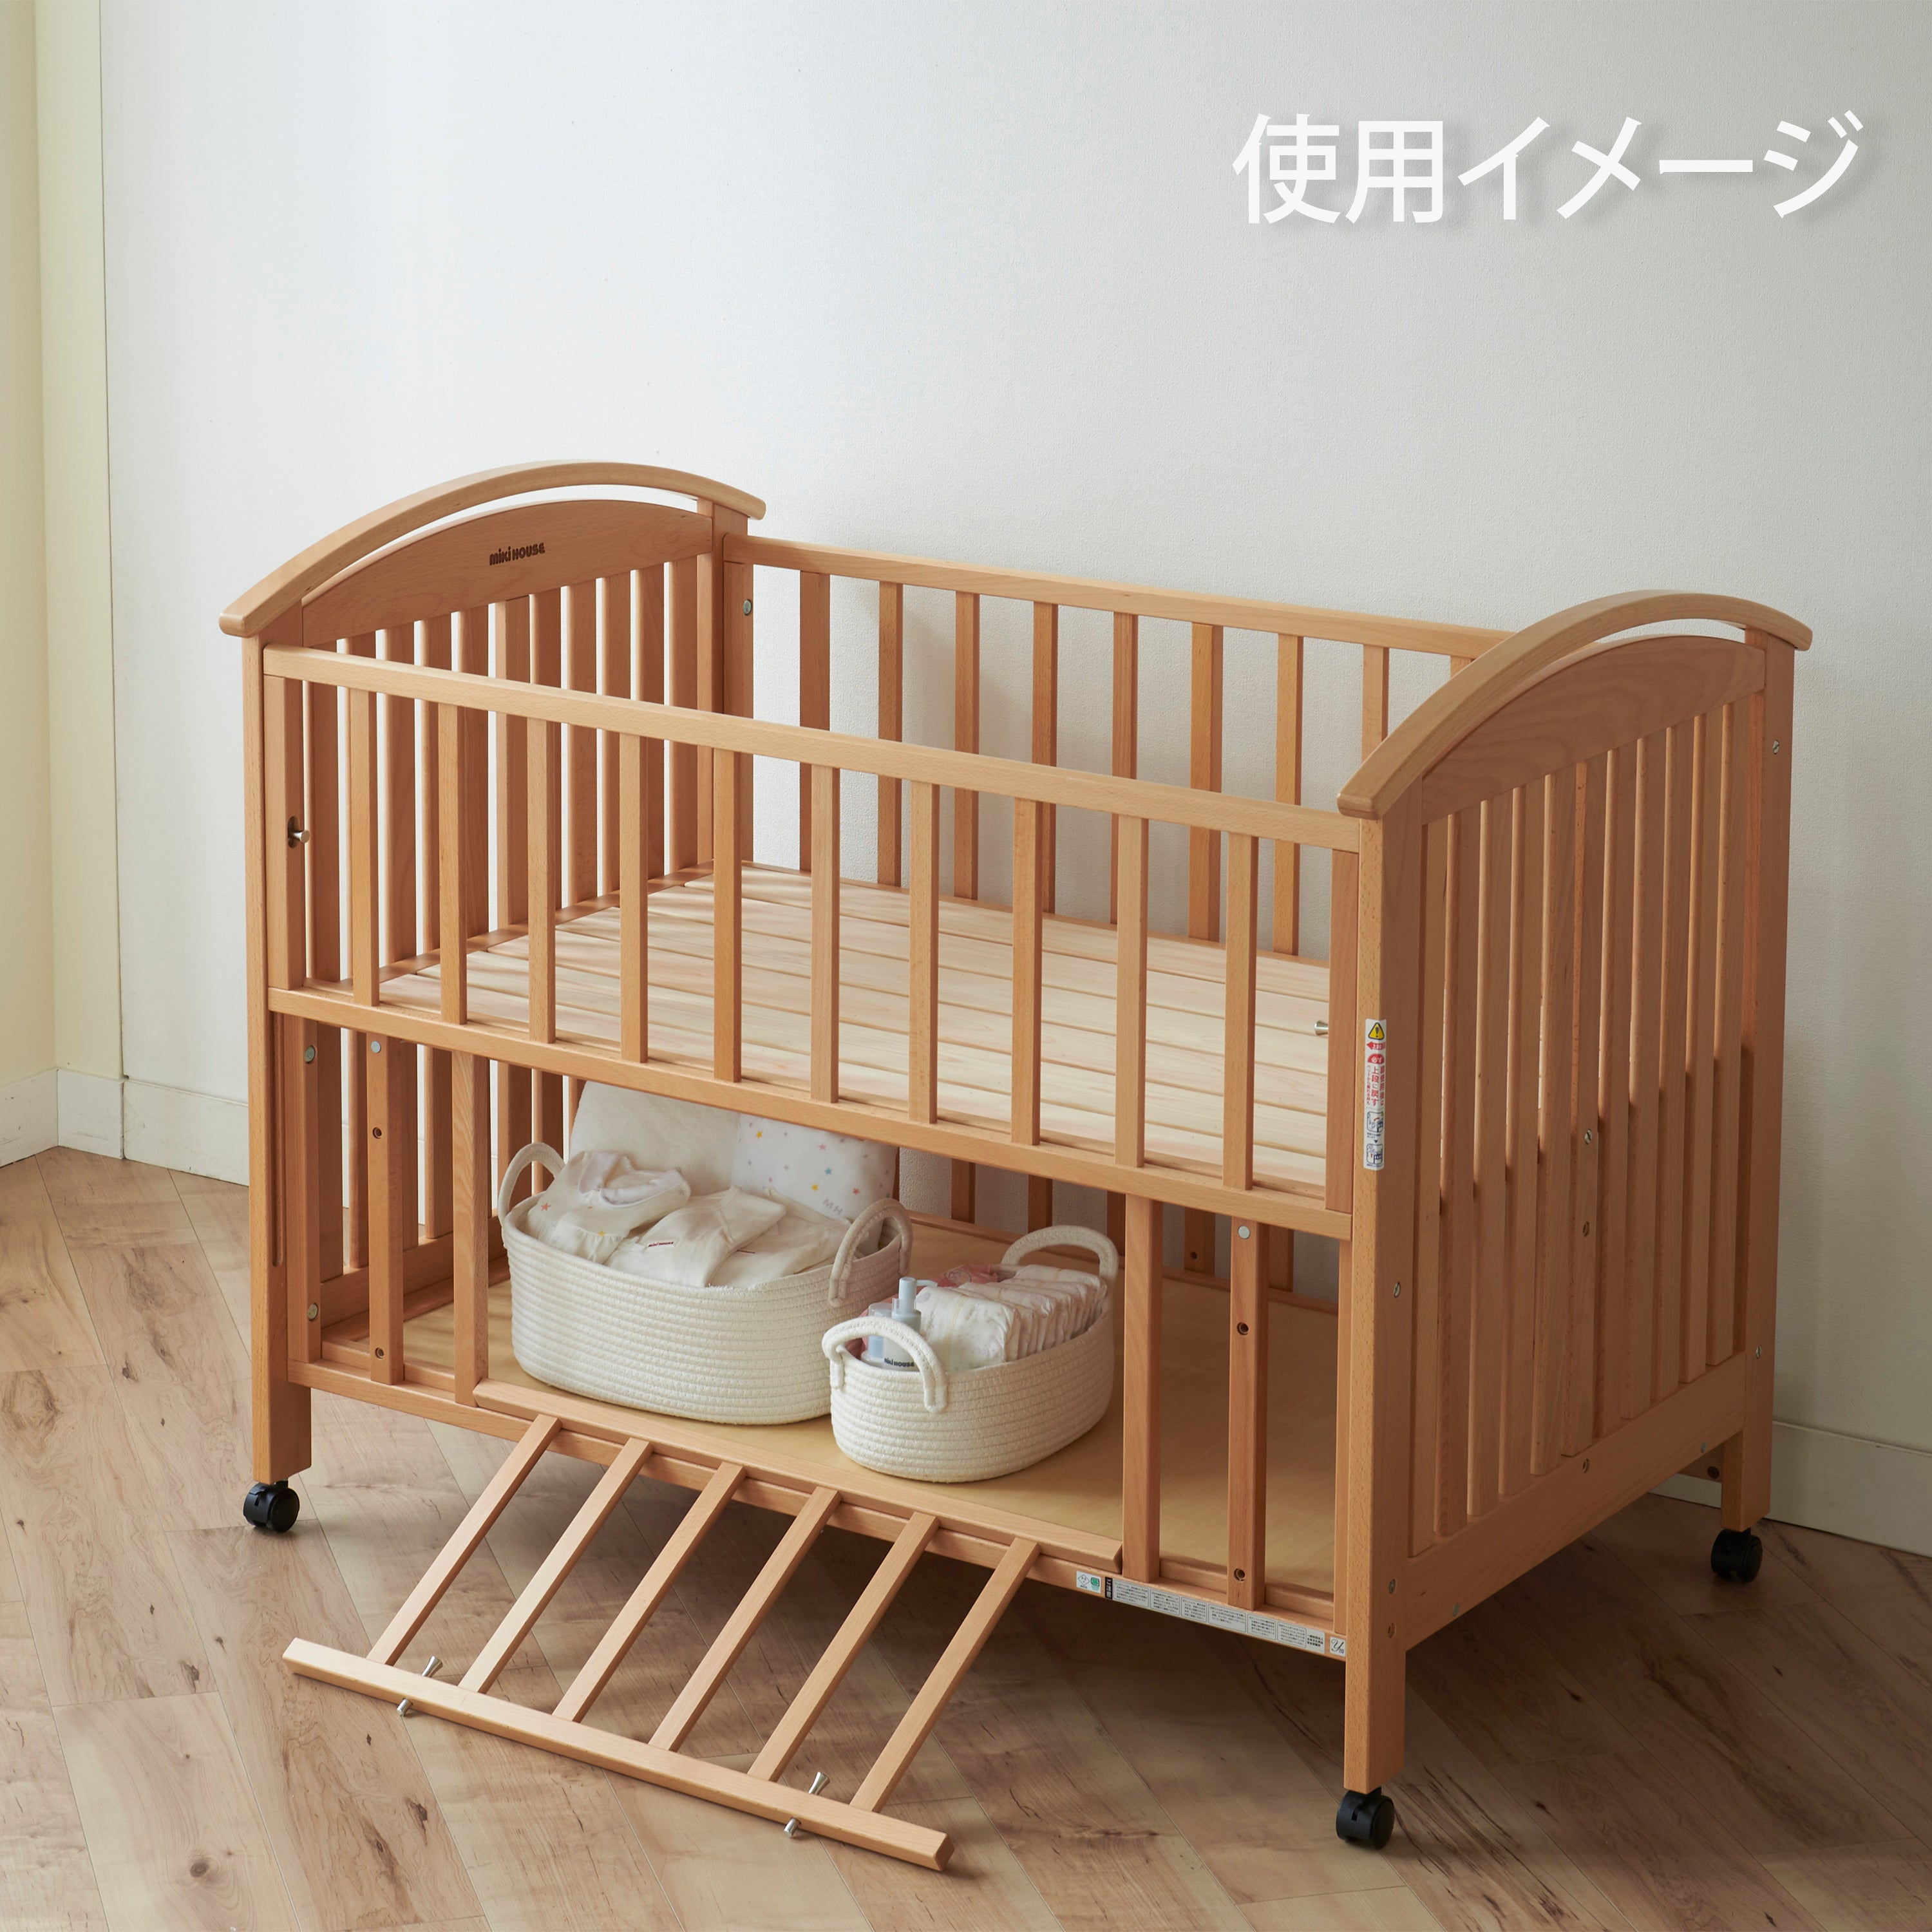 Crib | MIKI HOUSE OFFICIAL SITE